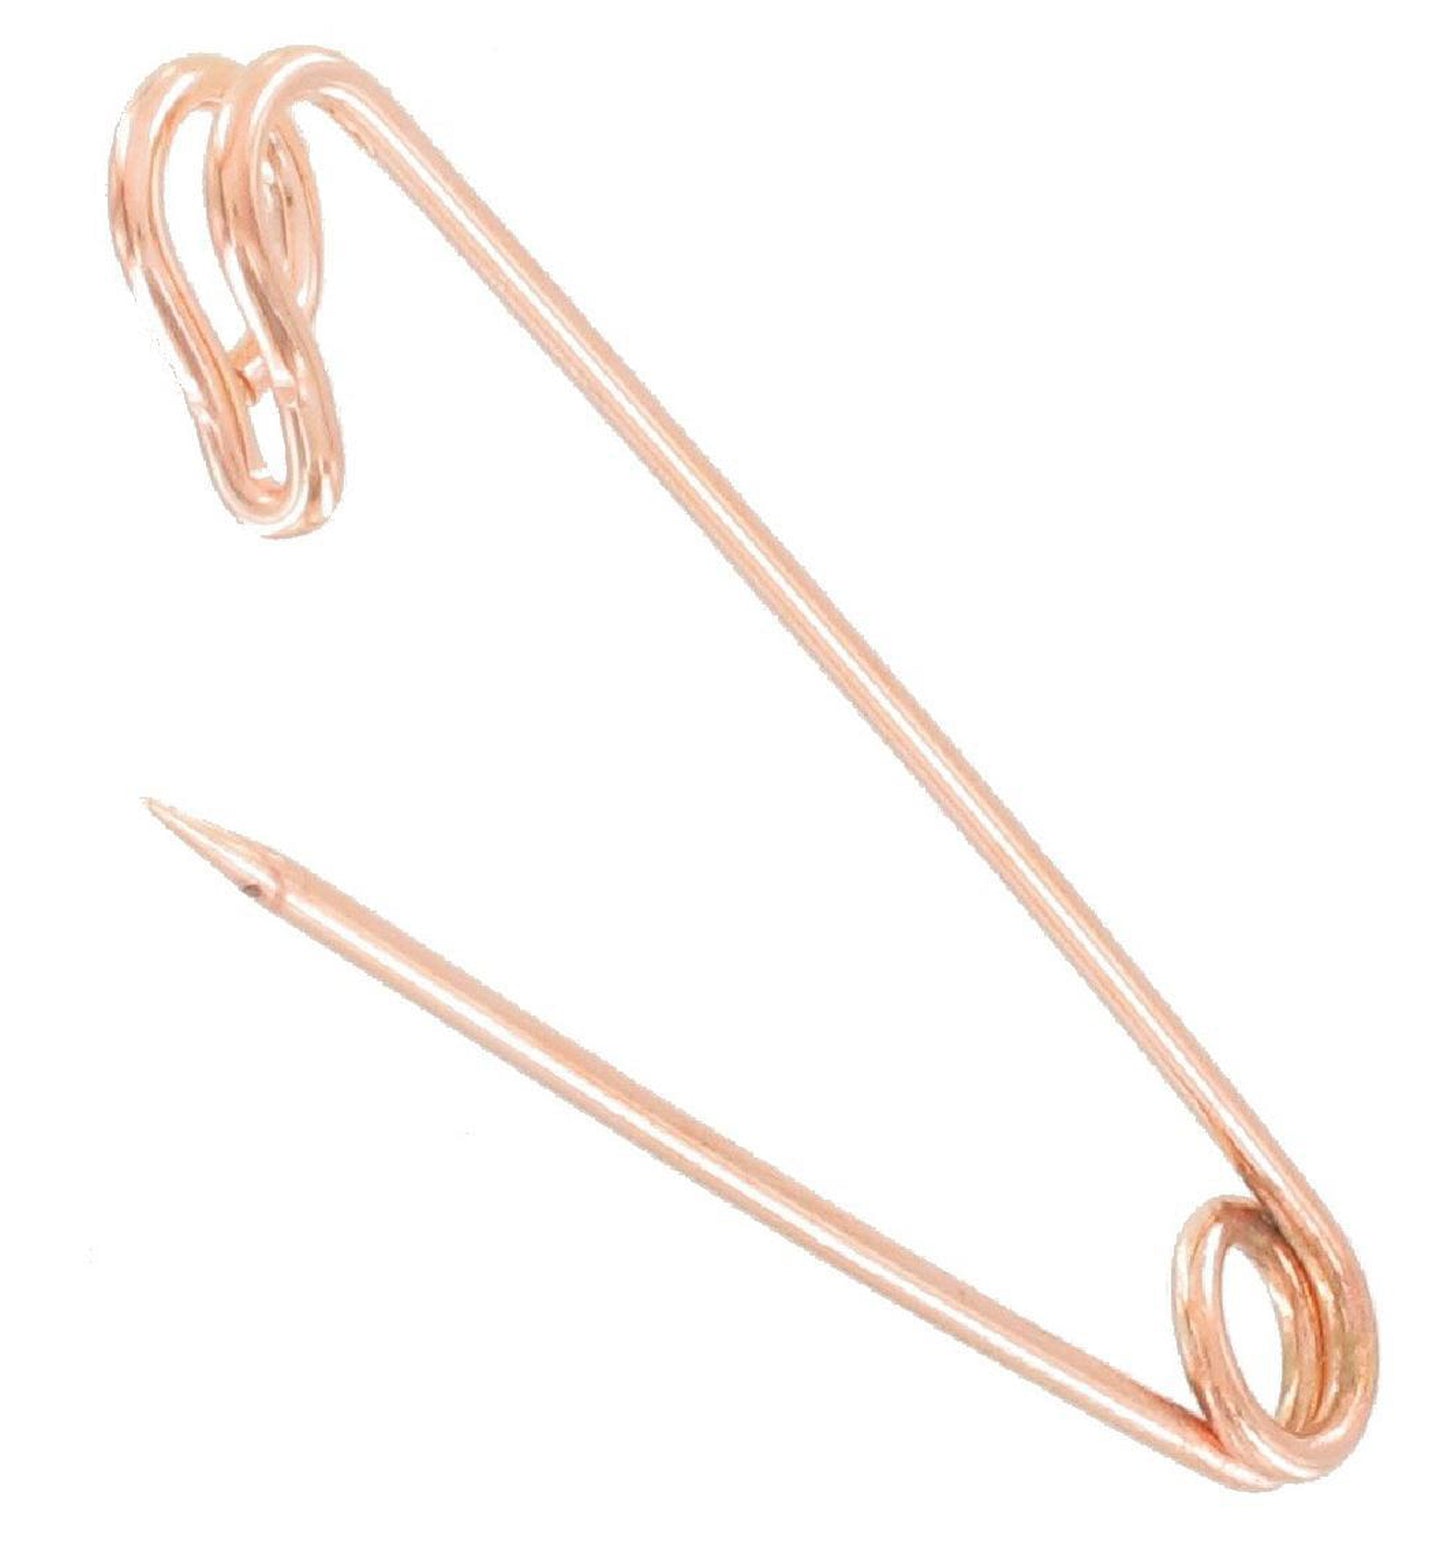 Ky & Co Made in USA Safety Pin Brooch Plain Puffy Heart Charm Rose Gold Tone